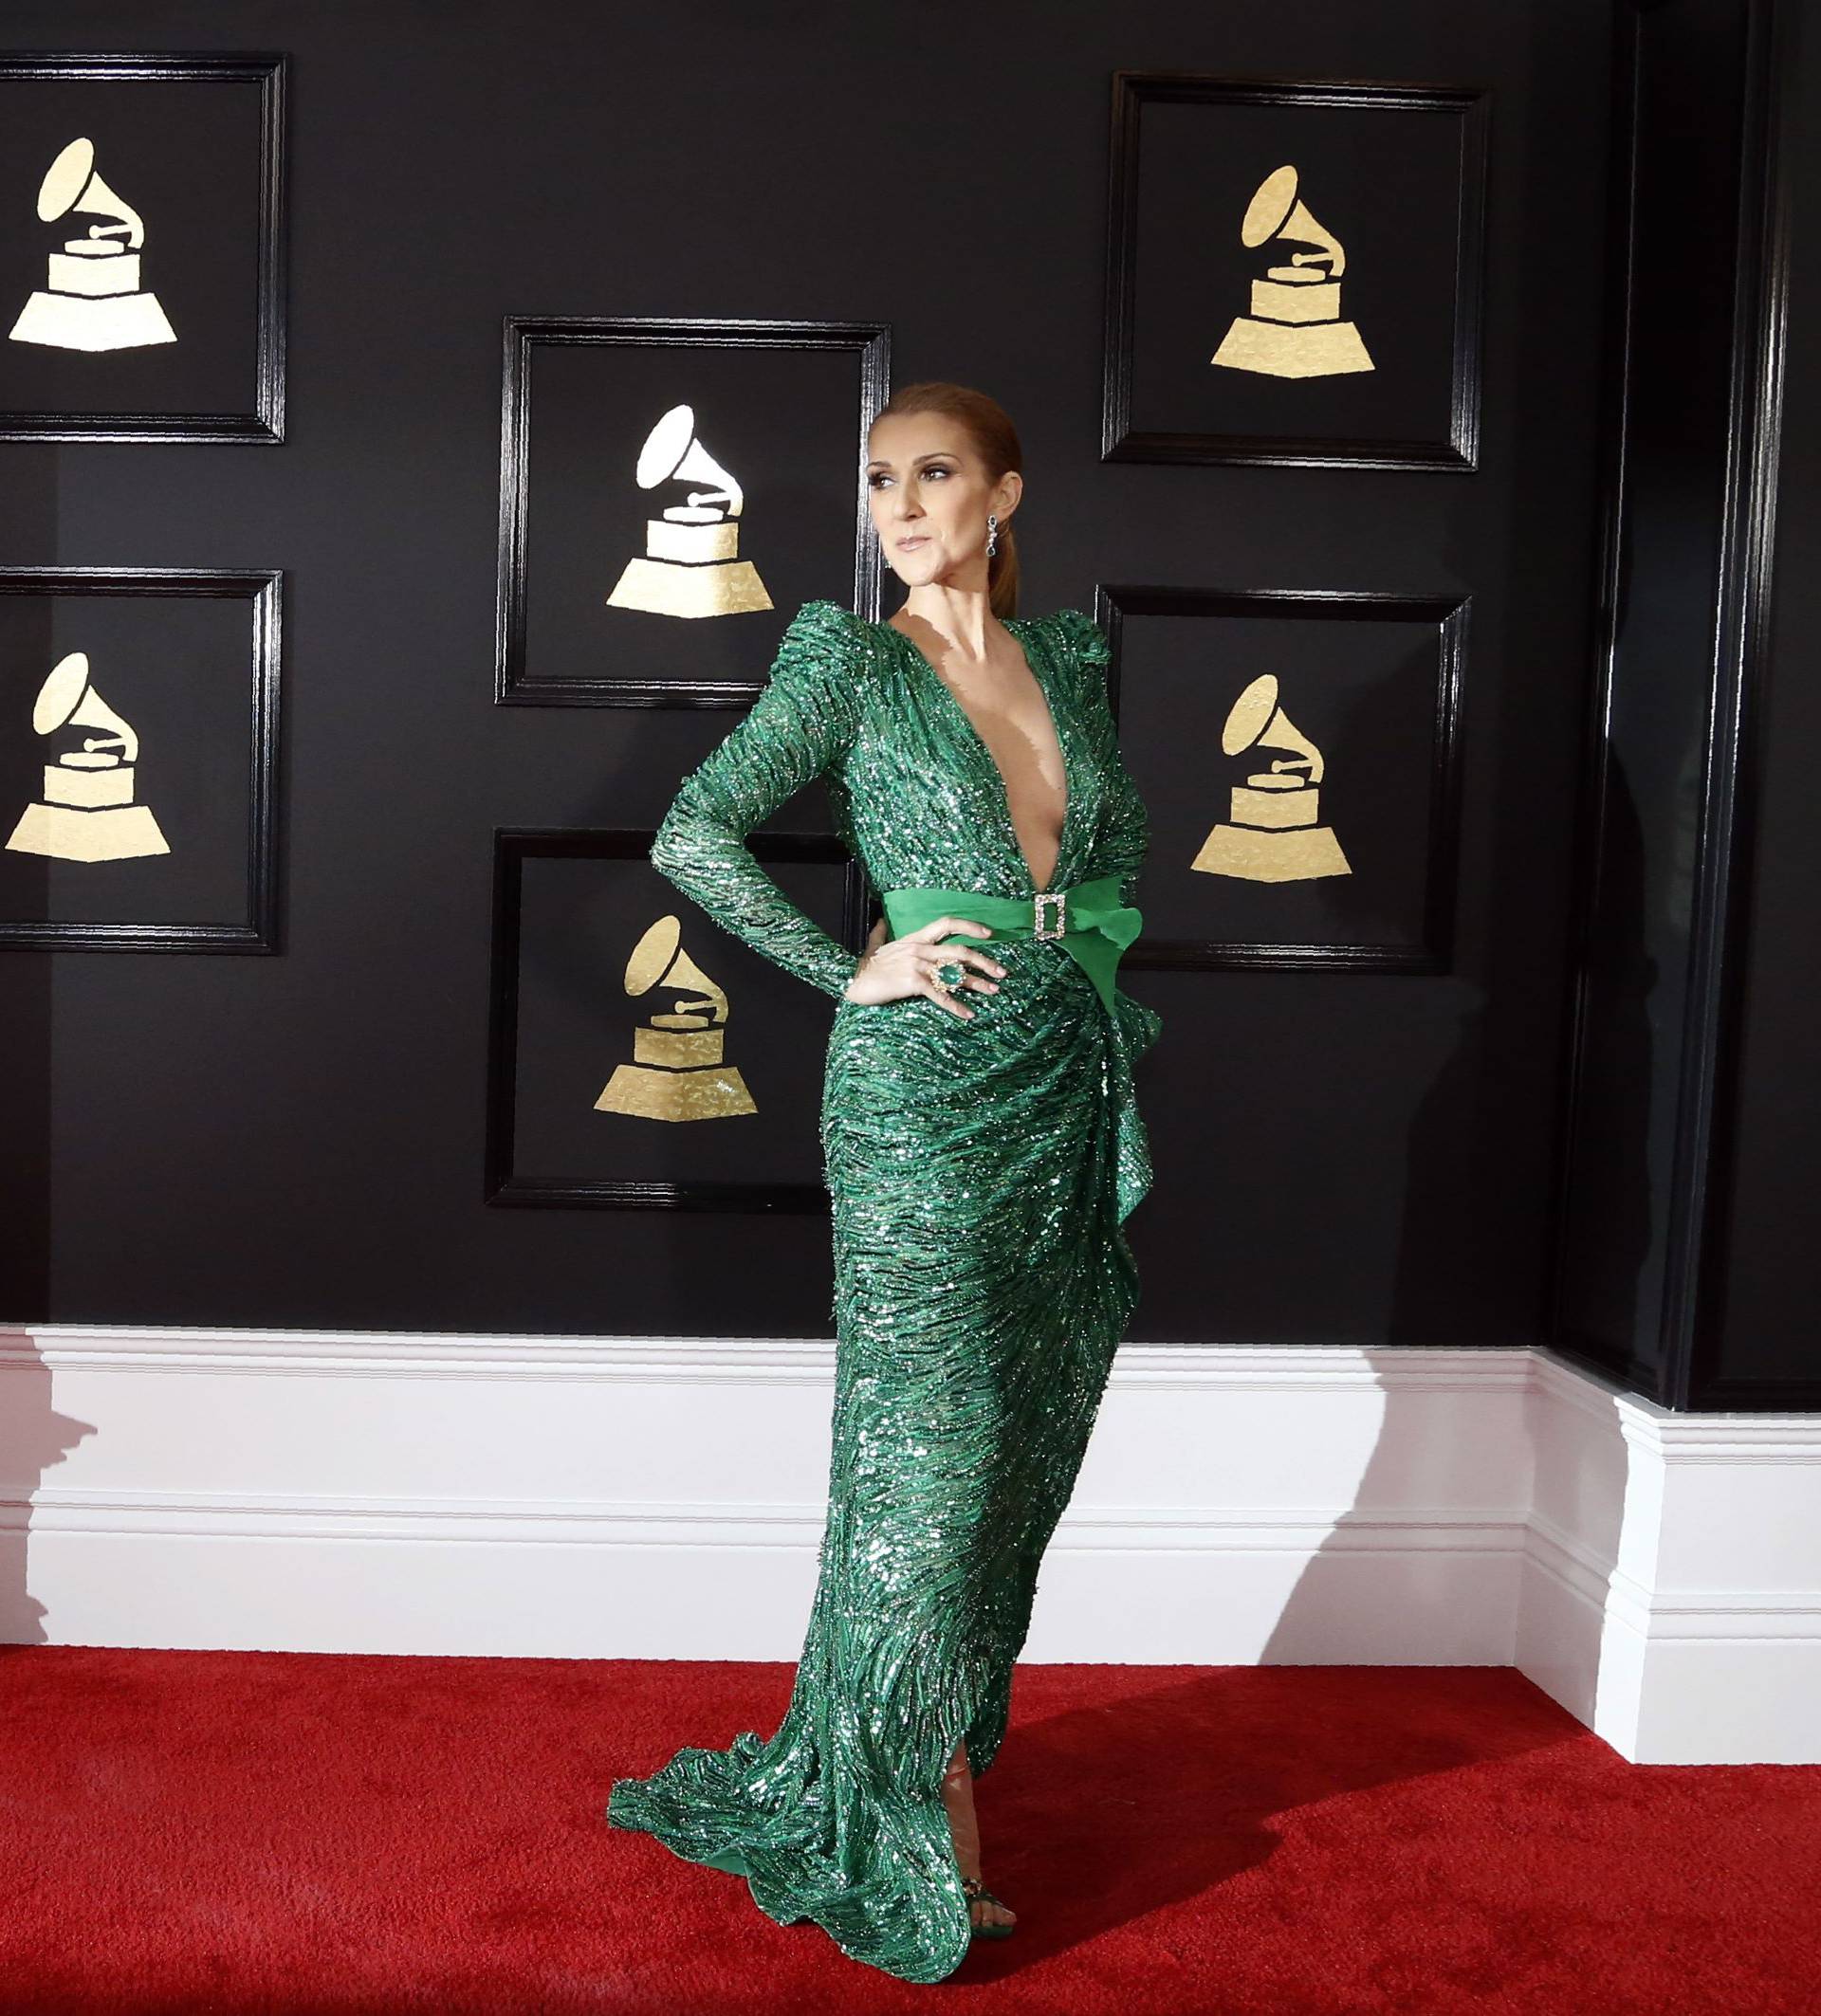 Singer Celine Deon arrives at the 59th Annual Grammy Awards in Los Angeles